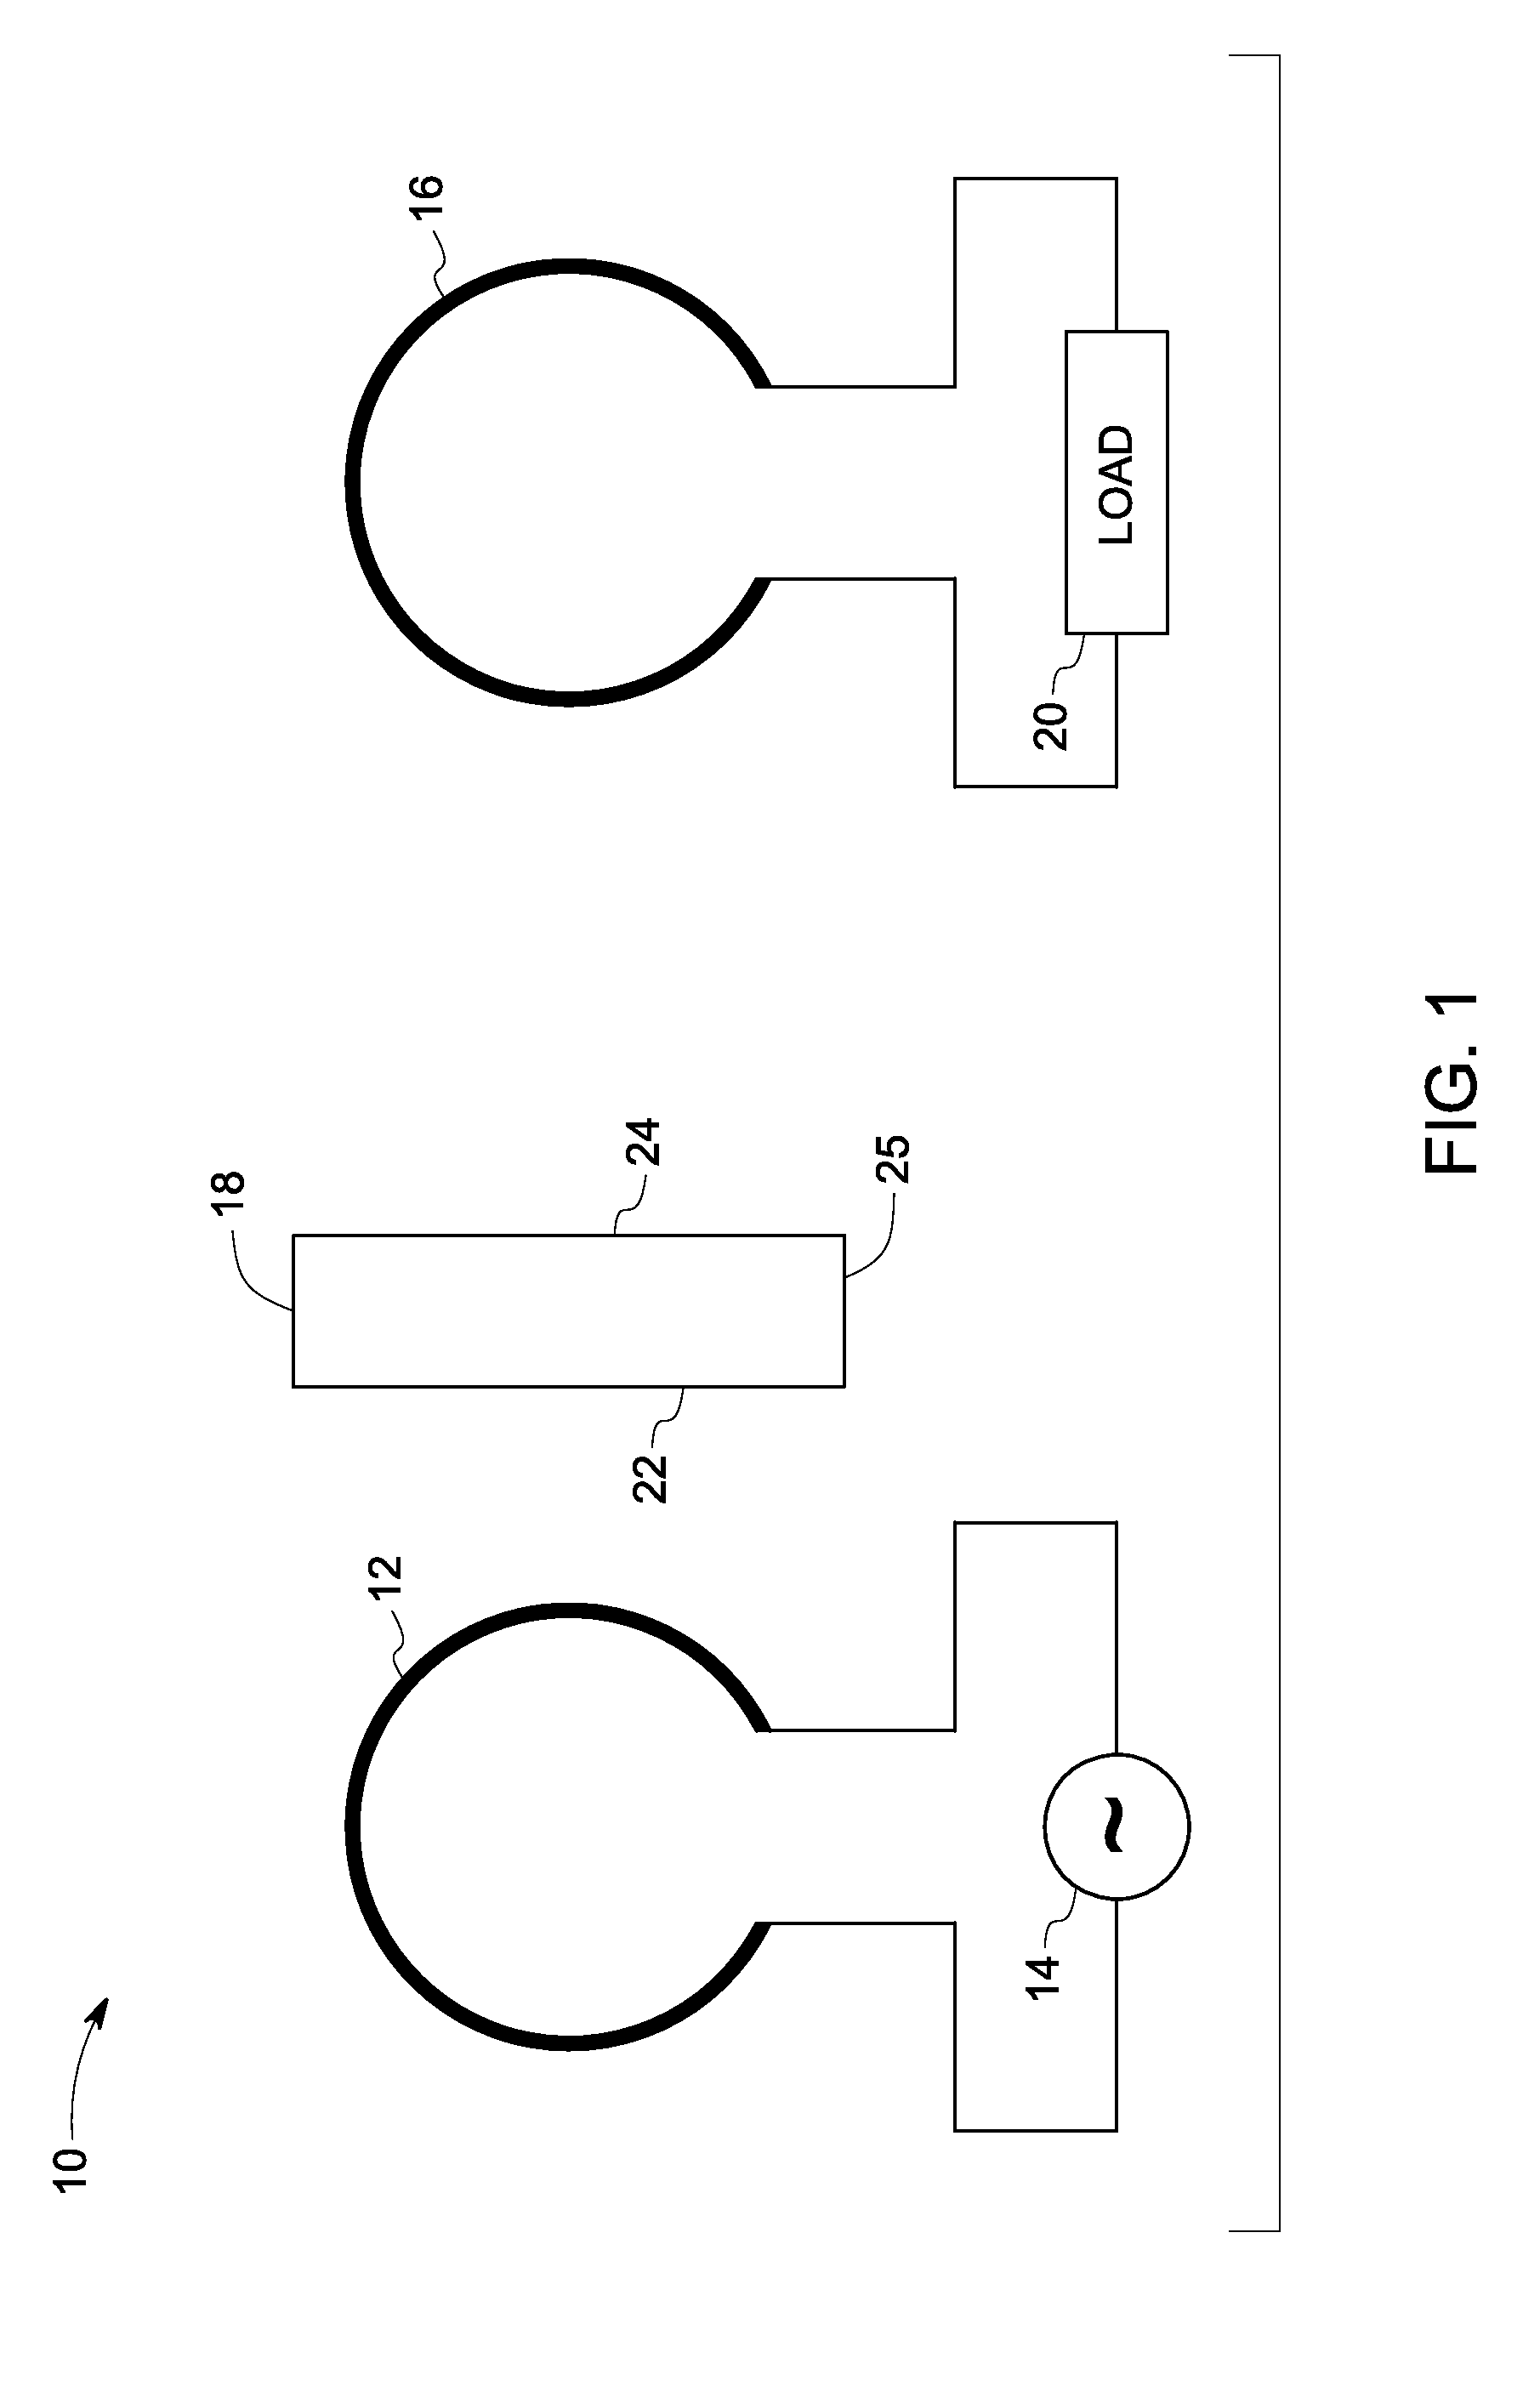 Dielectric materials for power transfer system